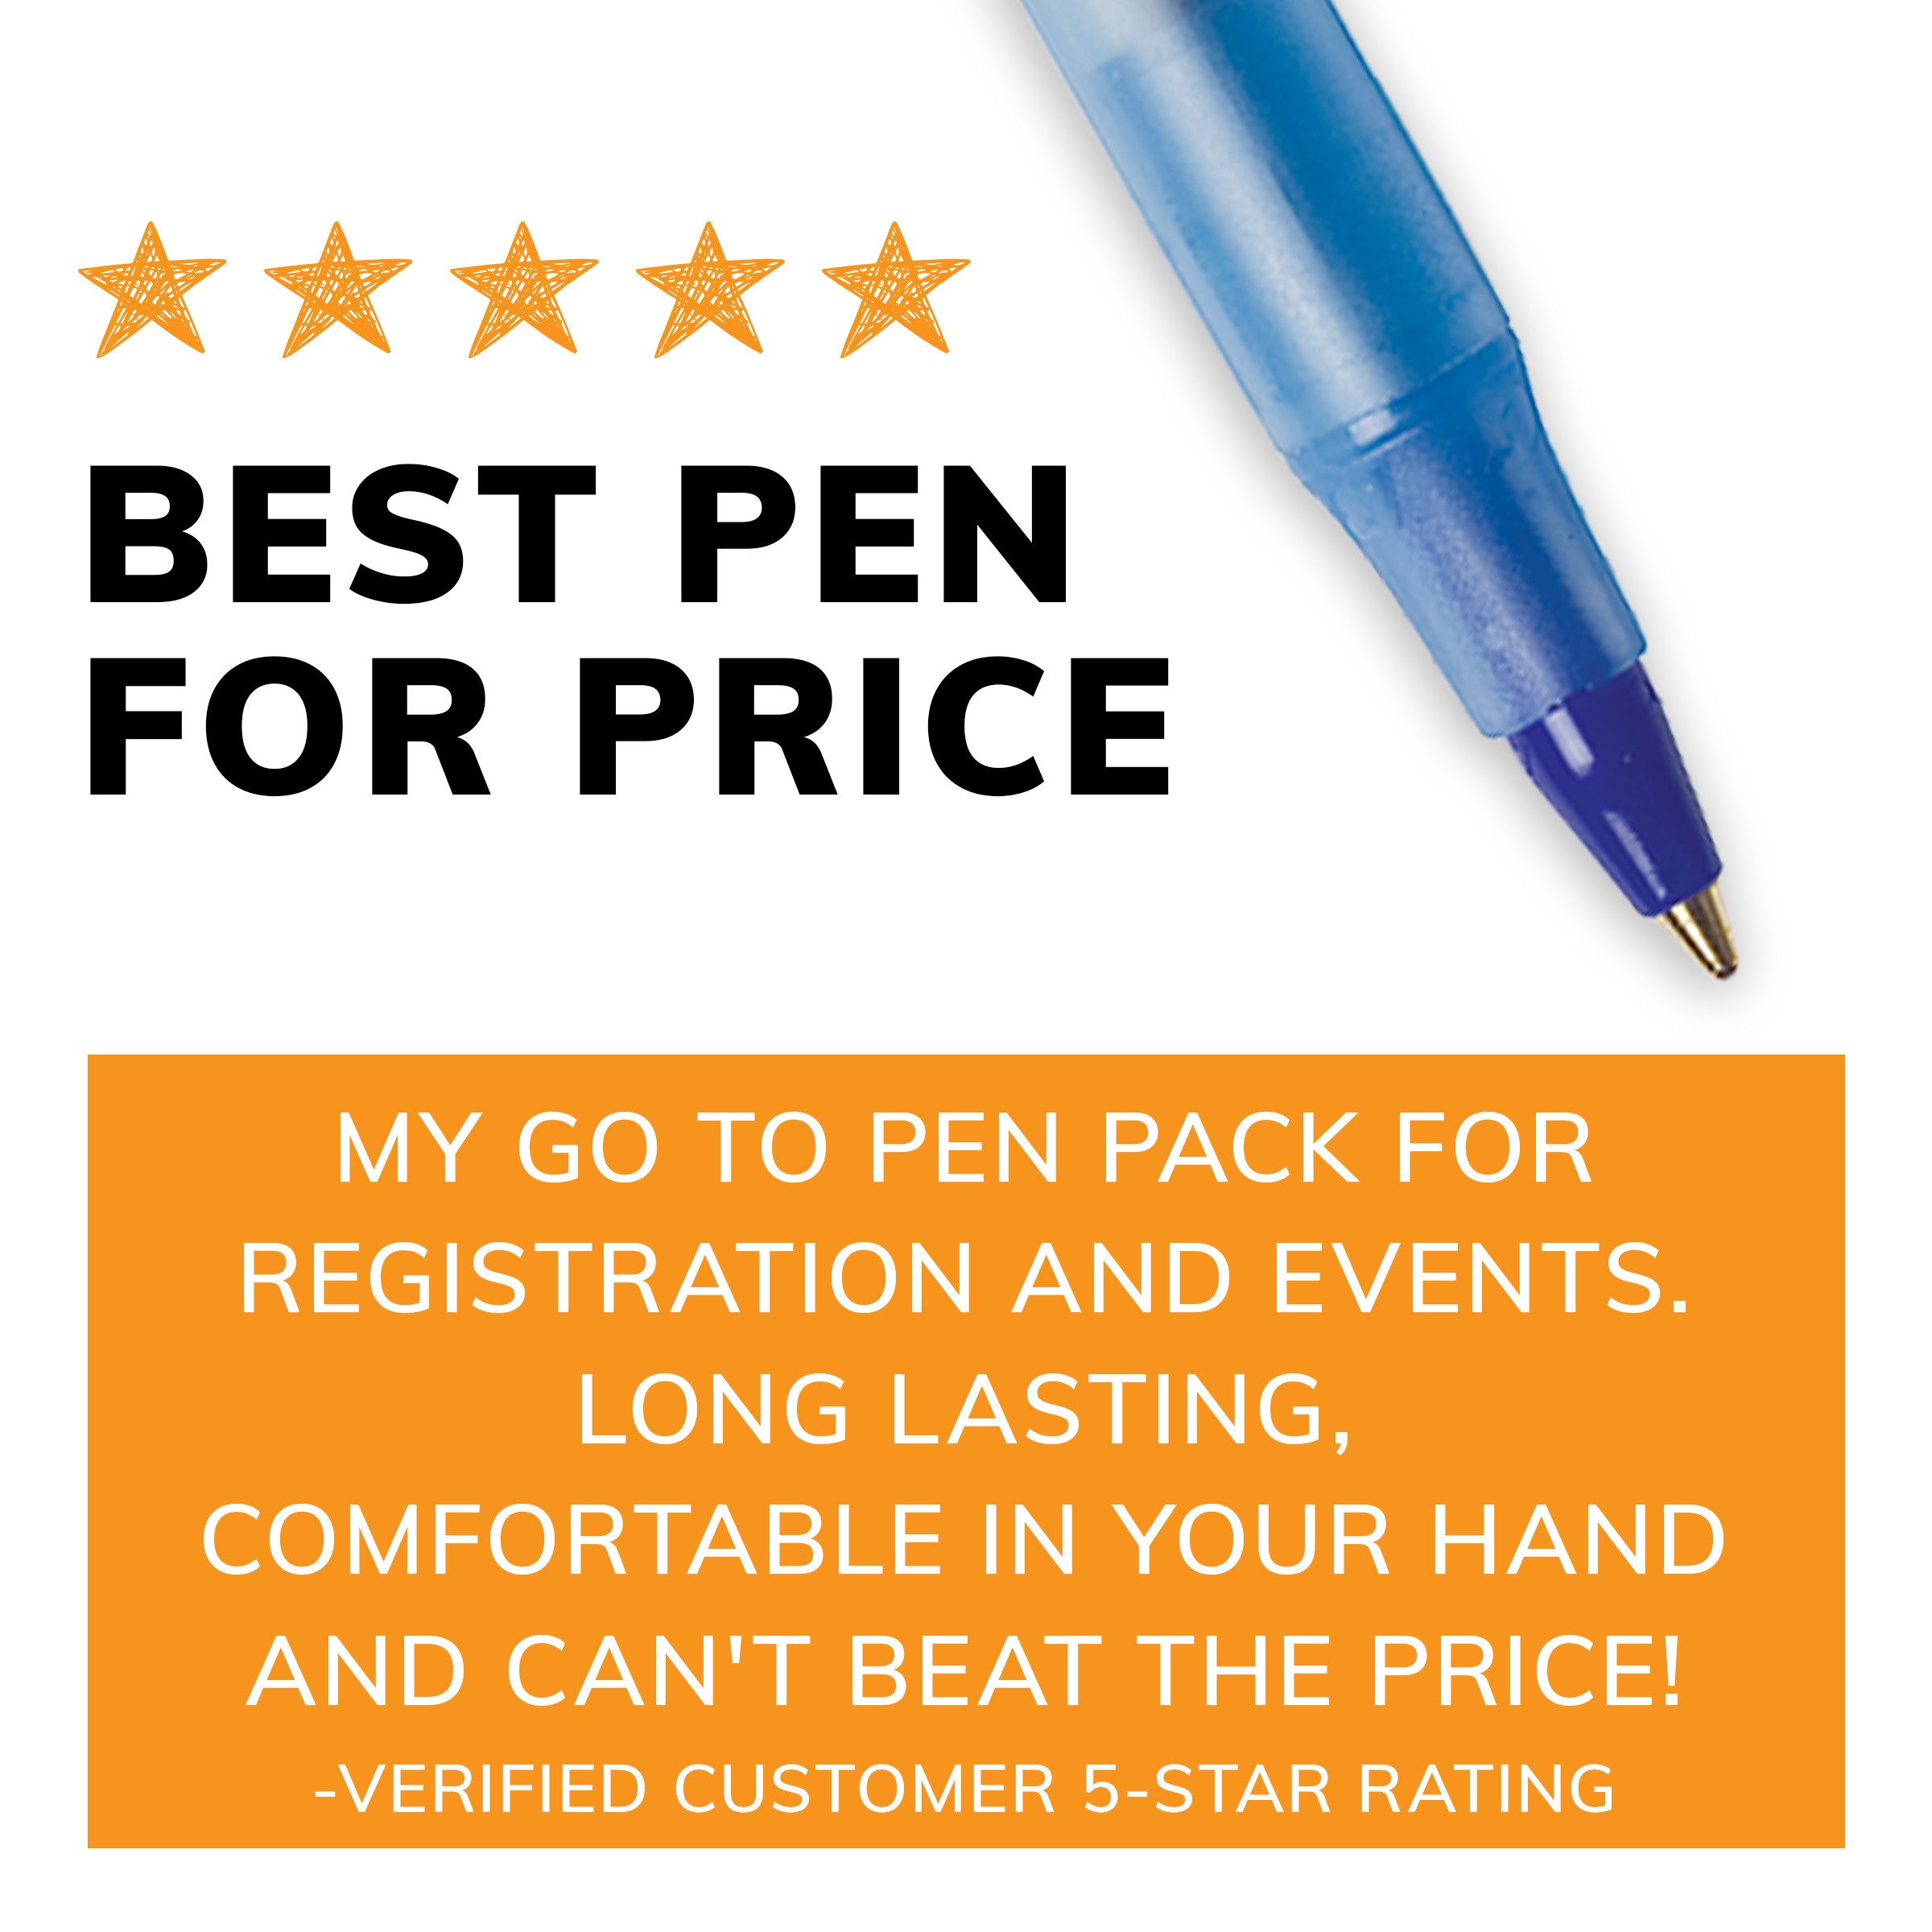 BIC Round Stic Xtra Life Ballpoint Pens, Medium Point (1.0mm), Blue, 60 Count - image 9 of 9